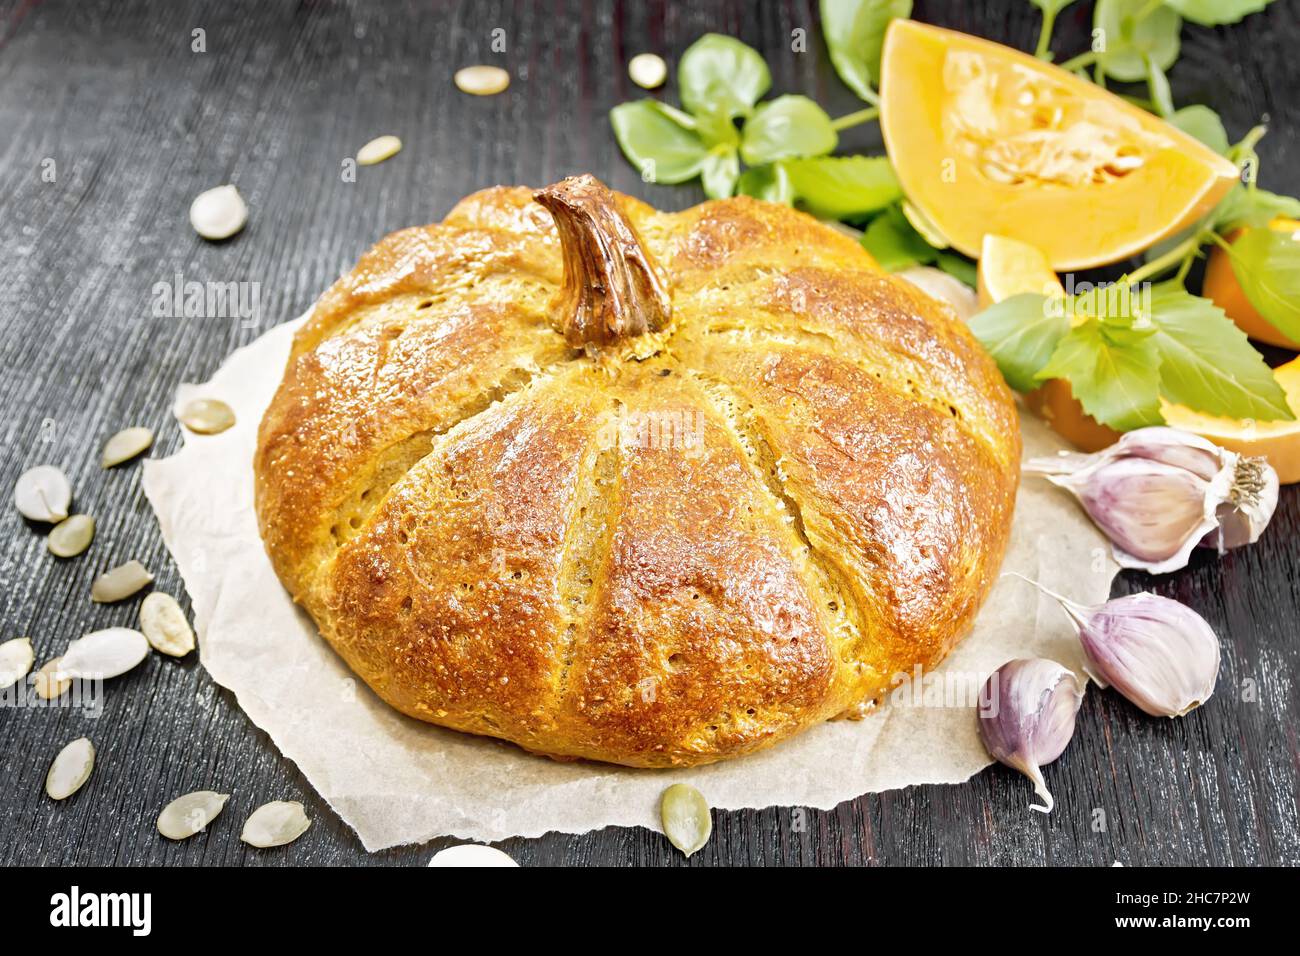 Pumpkin bread on parchment, garlic, basil, pieces and seeds of a vegetable on a wooden board background Stock Photo